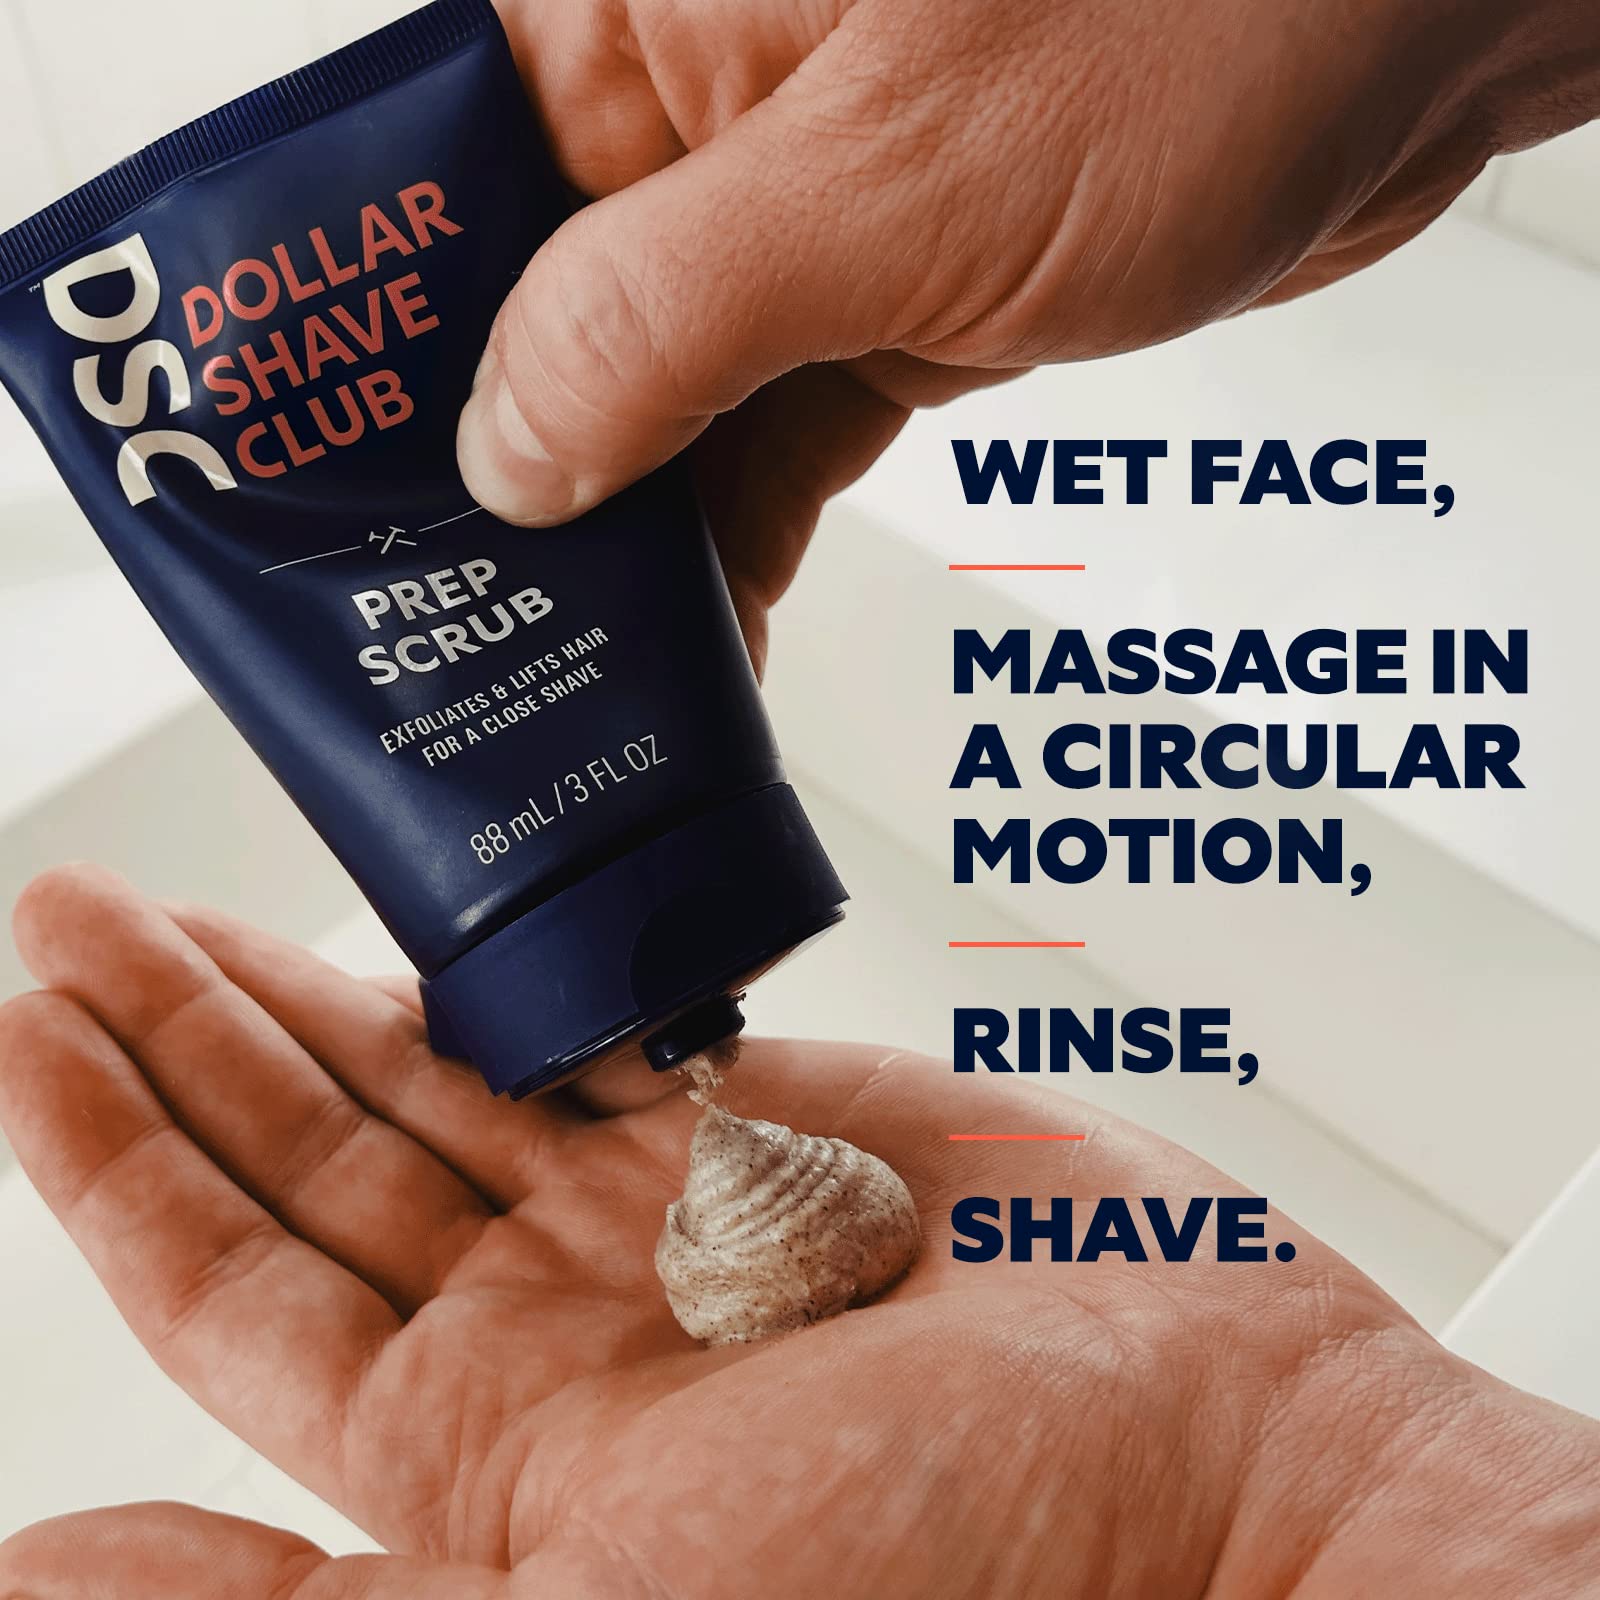 Dollar Shave Club | Prep Scrub 2 ct. | A Pre-Shave Exfoliant Scrub for Face & Body, Exfoliates Dead Skin Cells and Lifts Hairs For a Close Shave, Helps Prevent Ingrown Hairs, Exfoliating Face Scrub